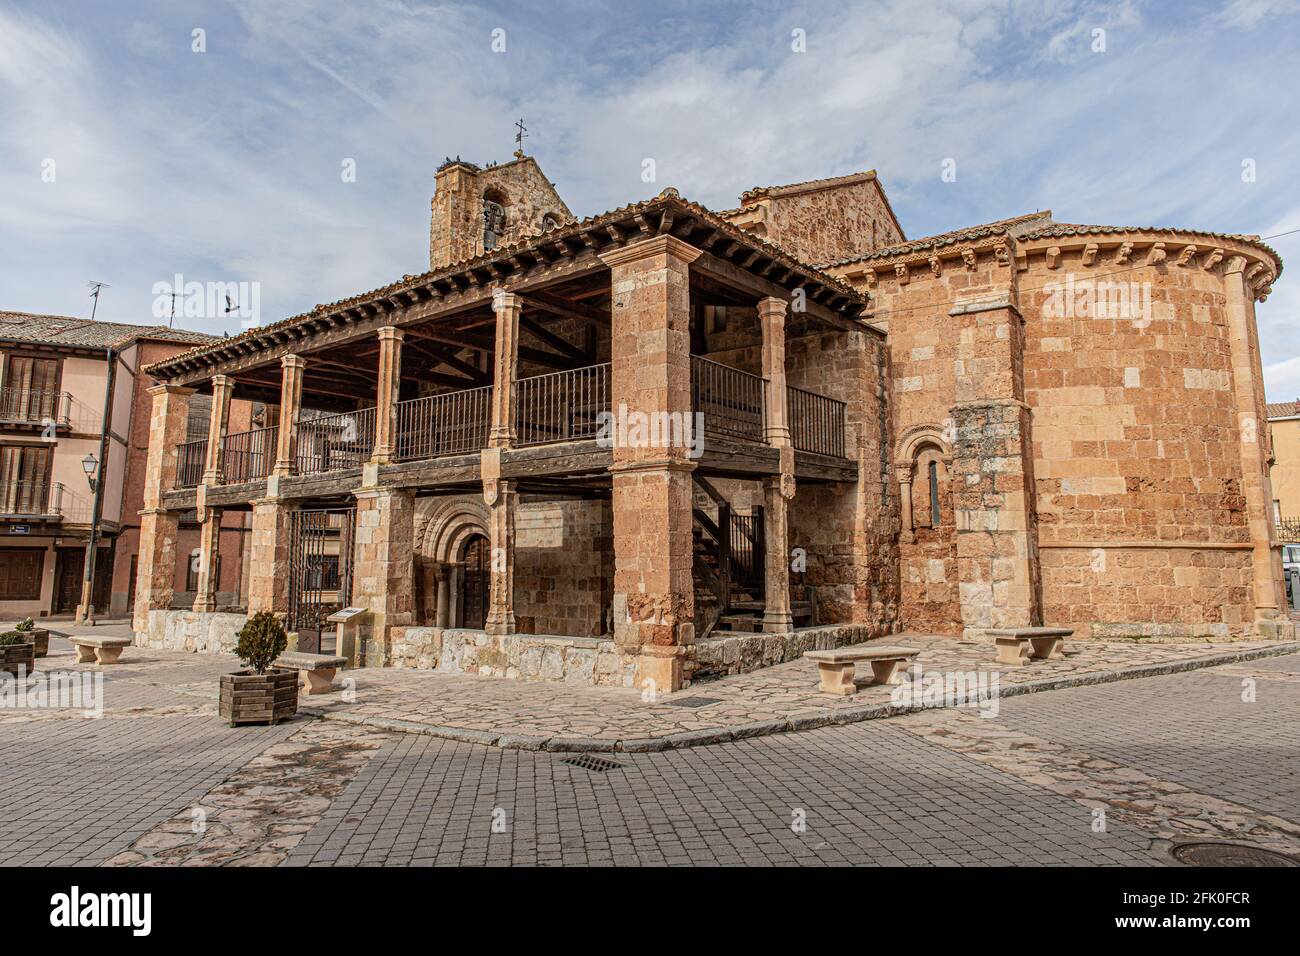 Historical Plaza Mayor in Ayllon under the cloudy blue sky in Spain Stock Photo